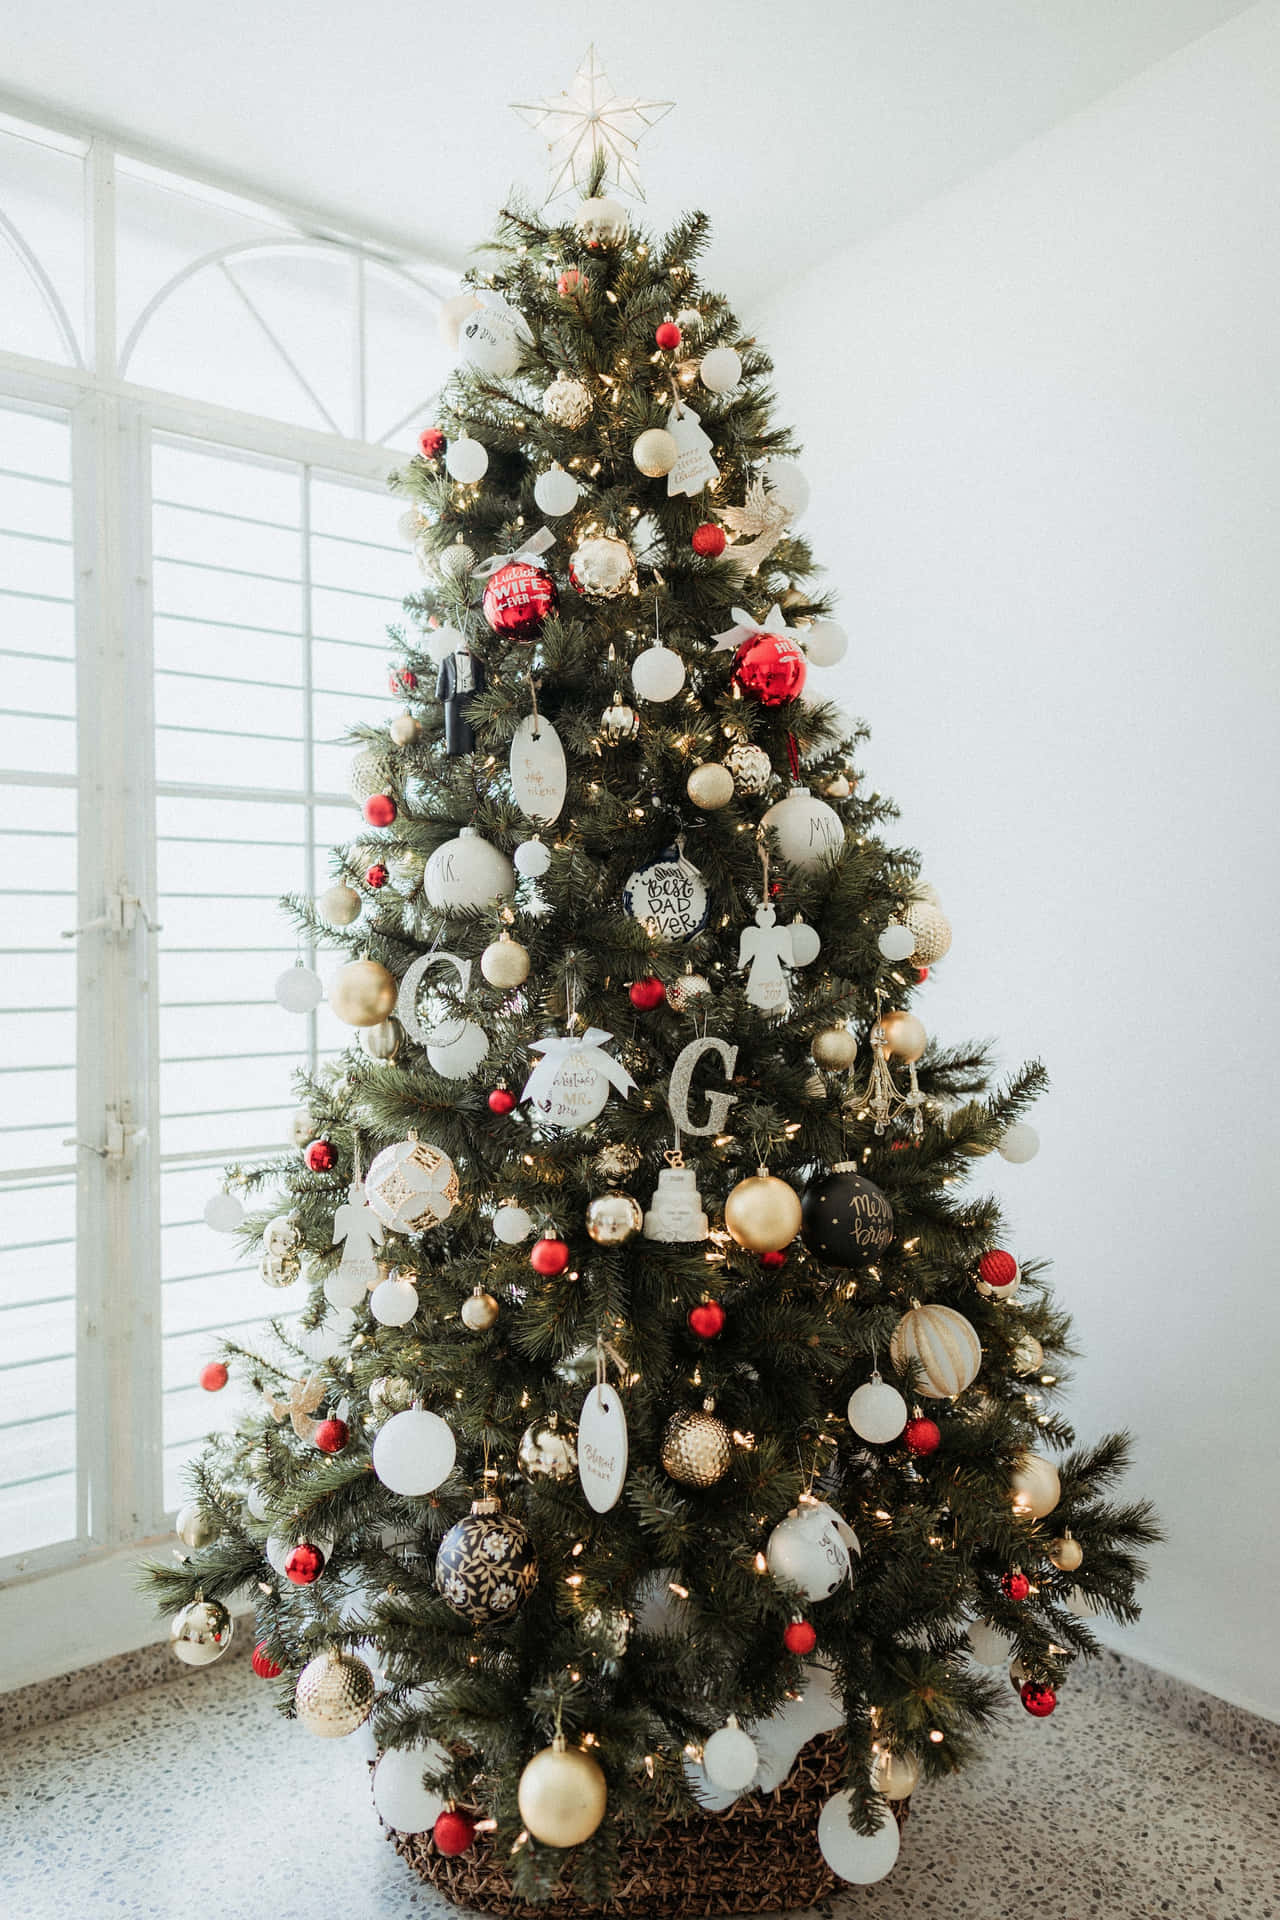 A stunning Christmas tree brings aesthetic vibes to the holiday season. Wallpaper